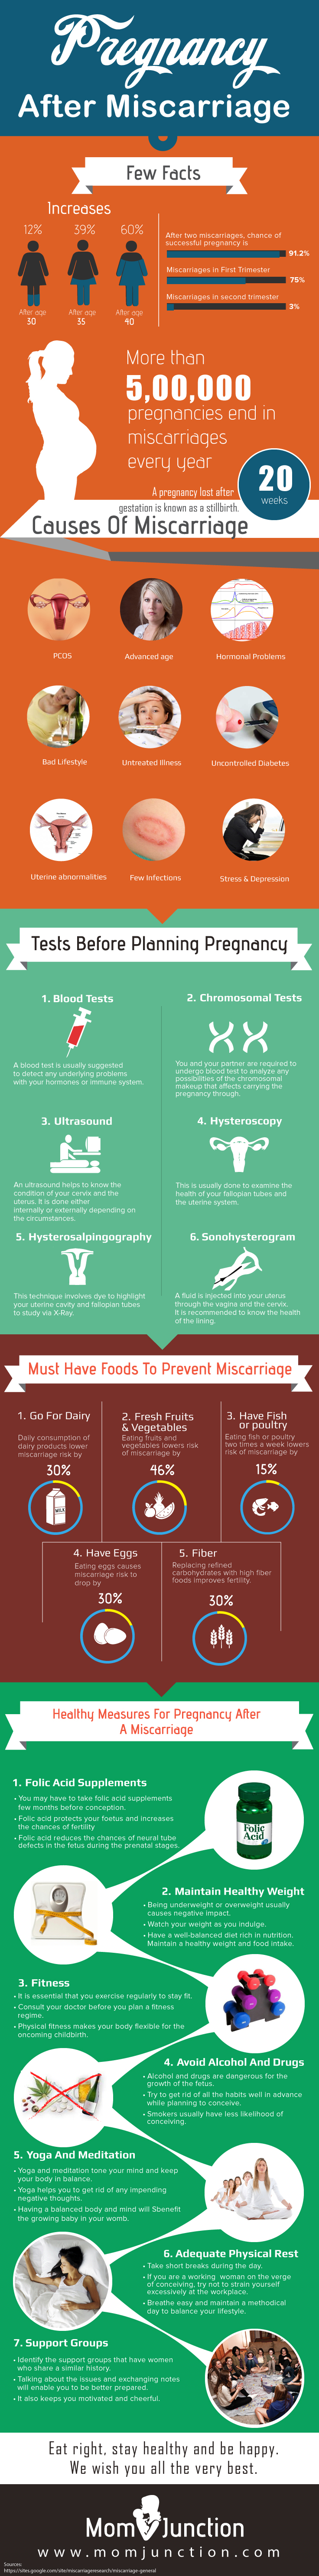 Getting Pregnant After Miscarriage: Things To Keep In Mind